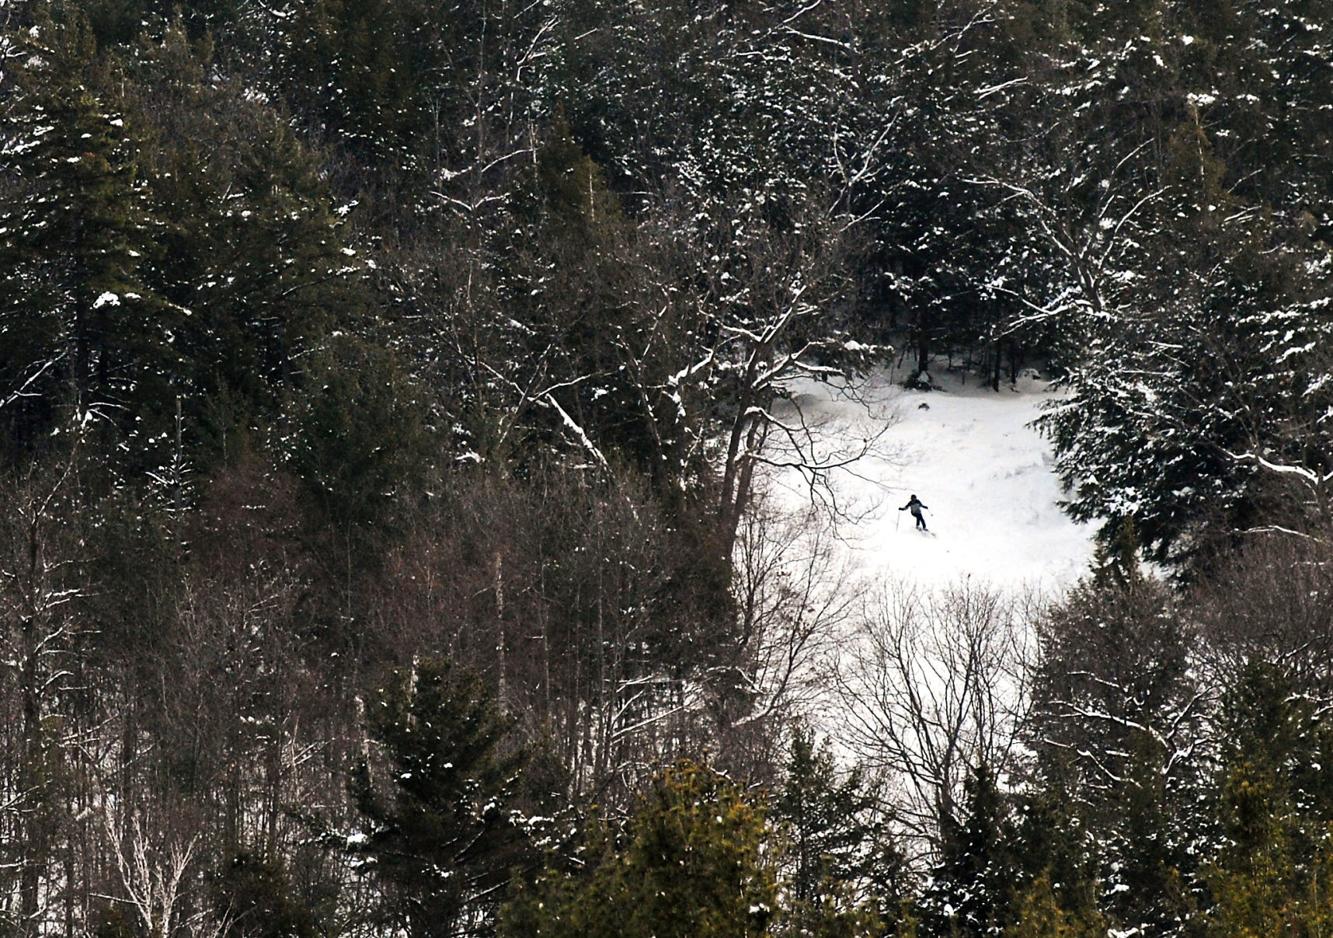 skier at hickory ski area, framed by trees